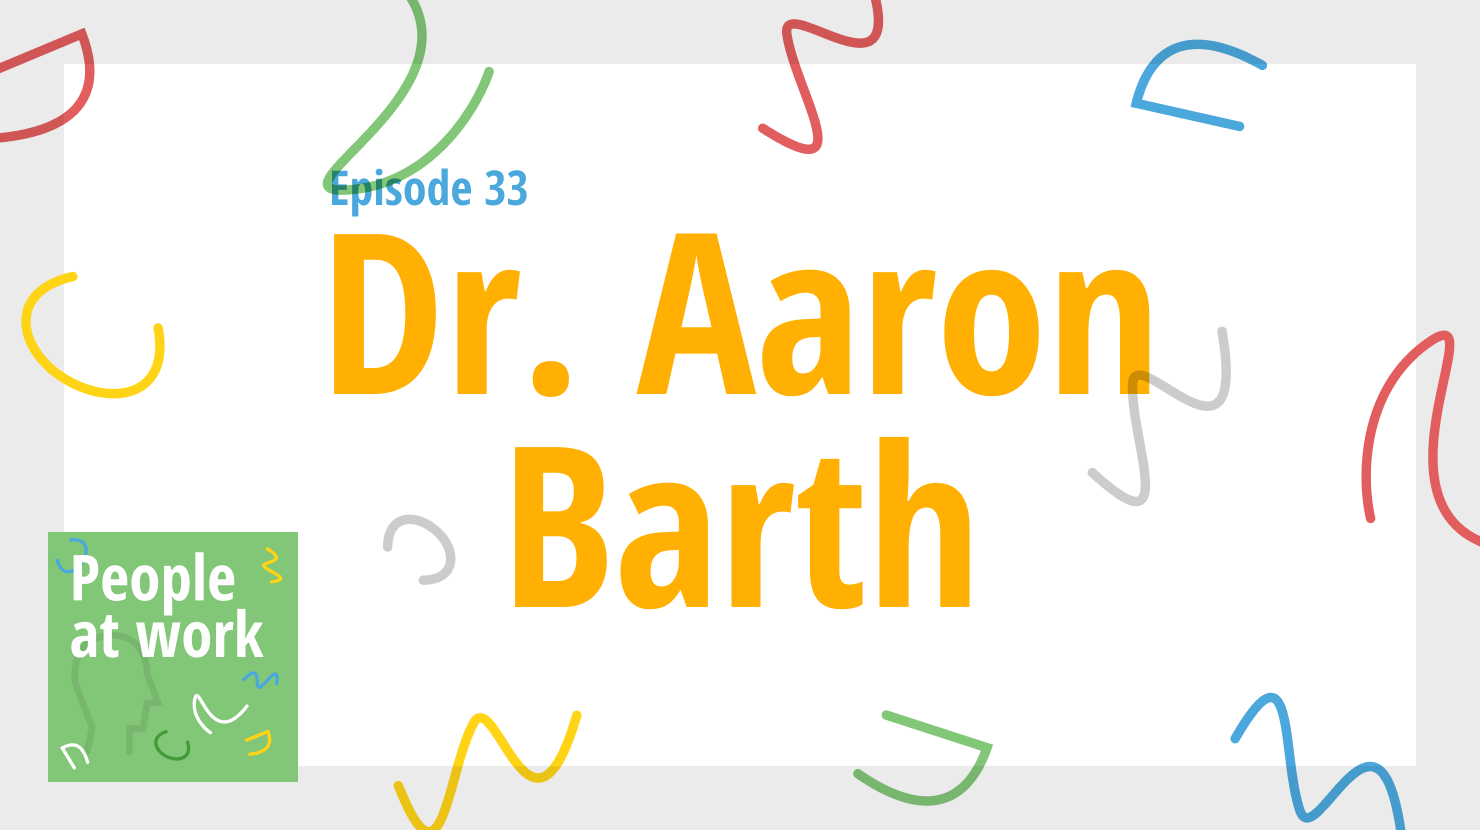 Dr. Aaron Barth on why truth is stronger than optics